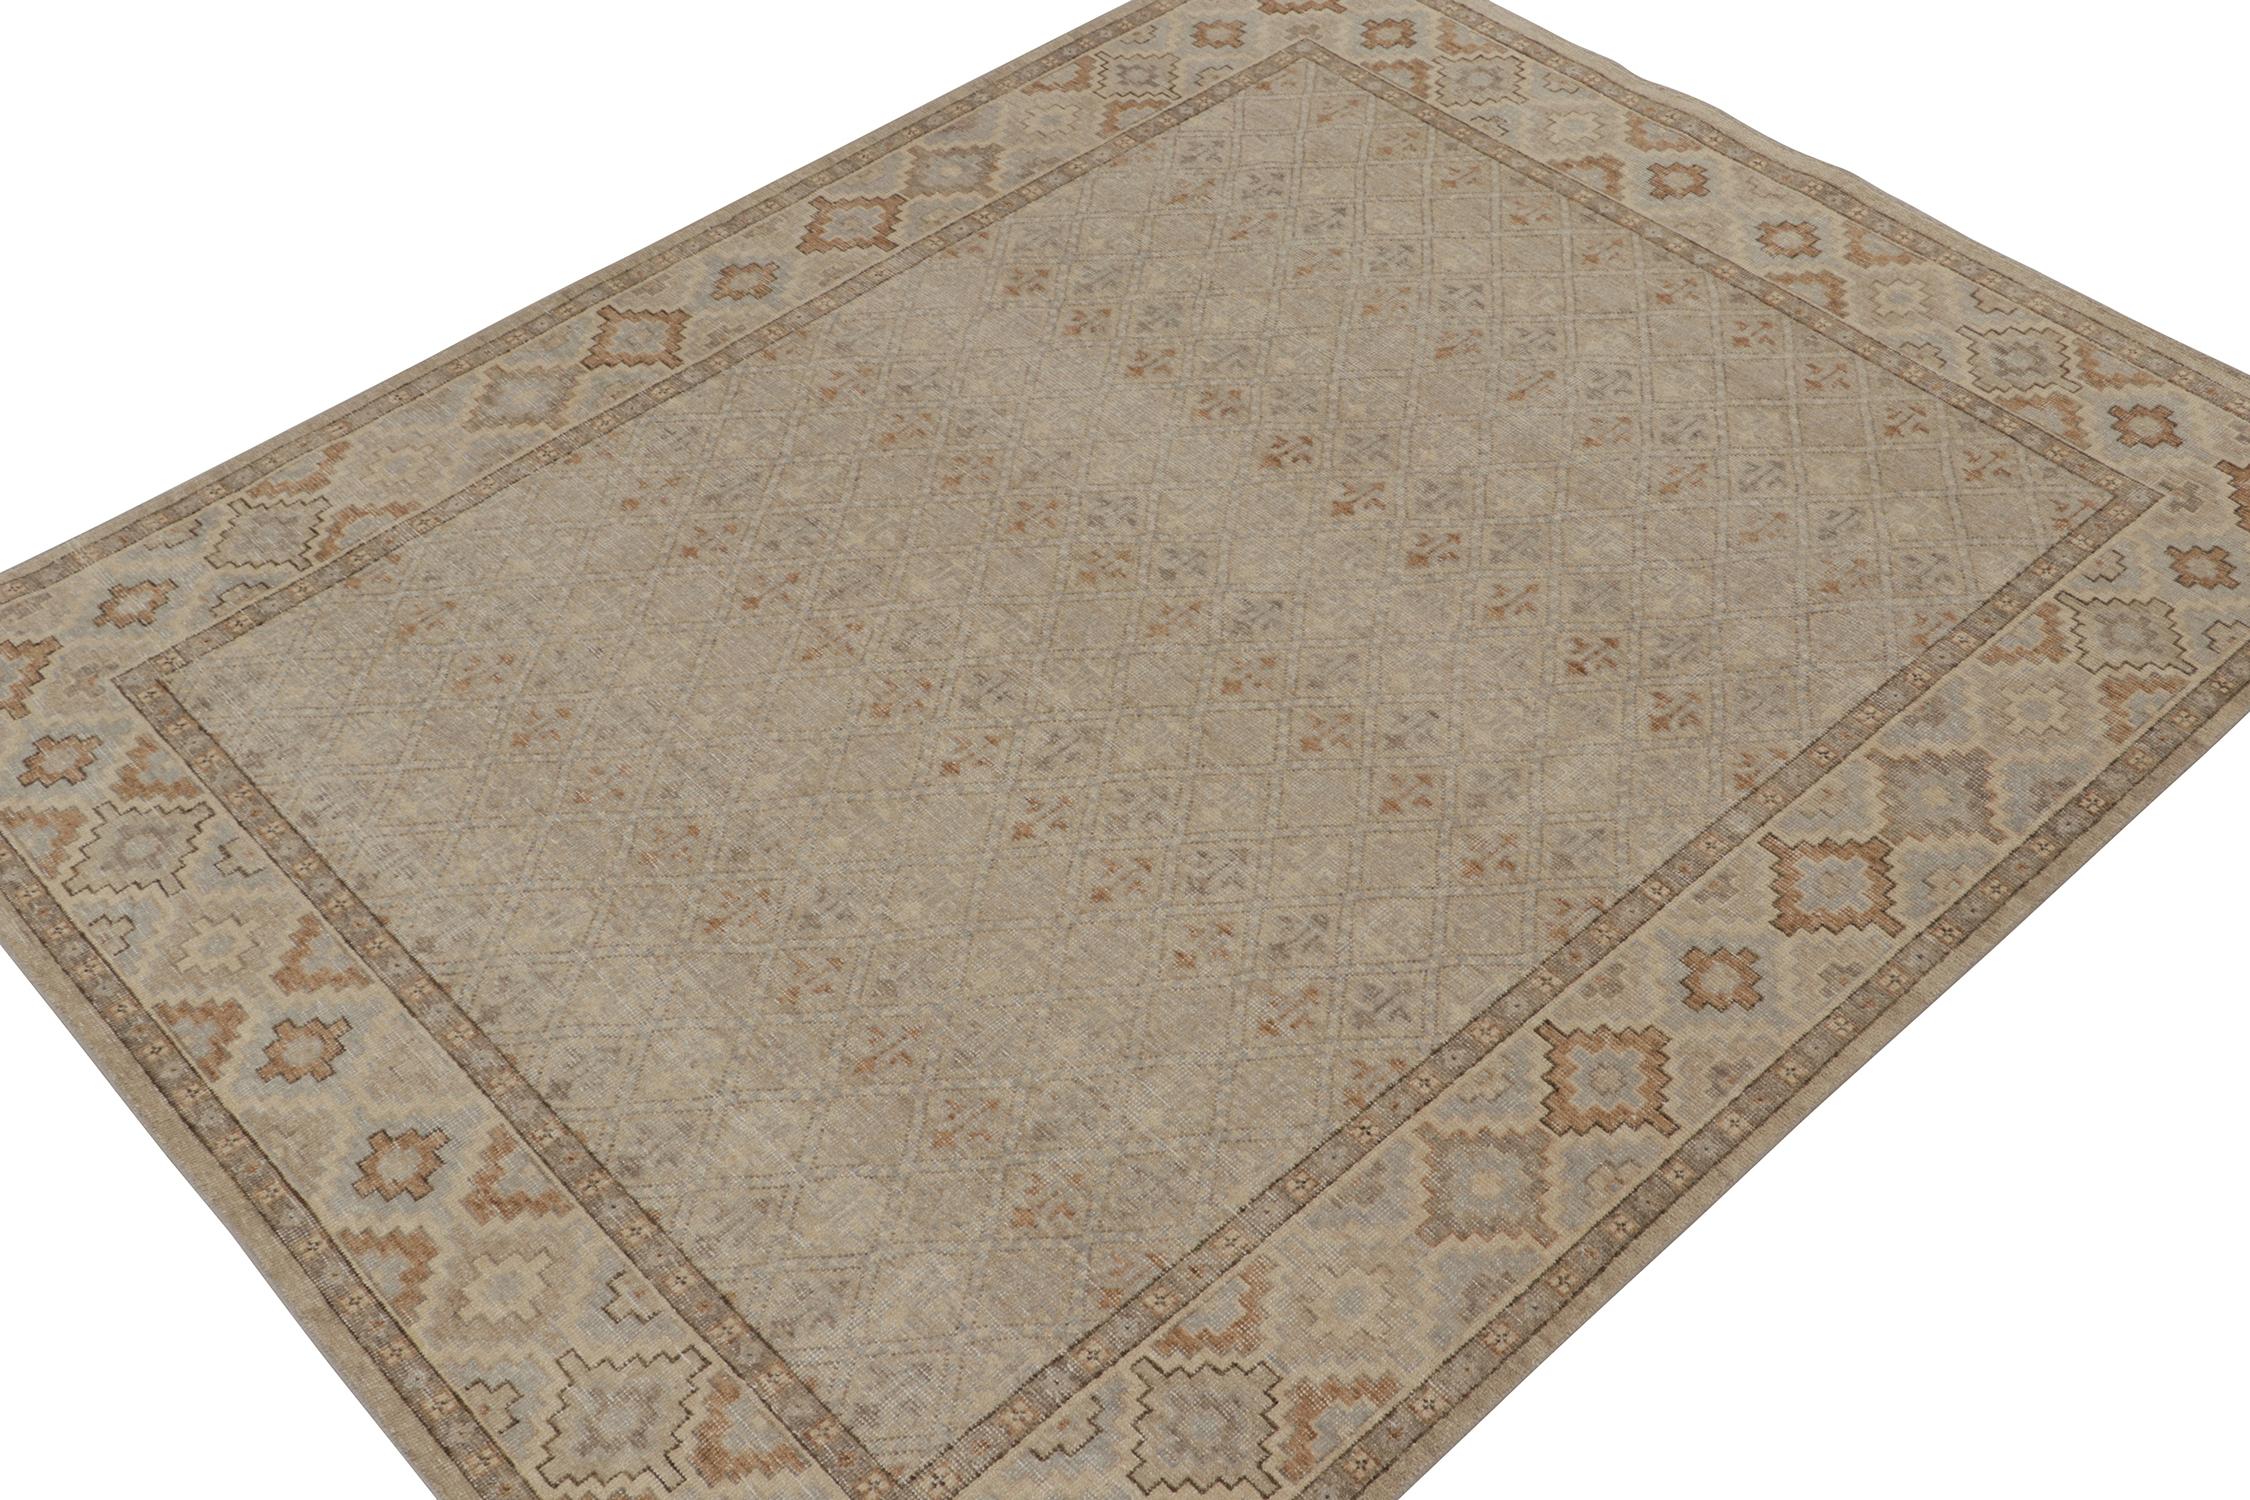 Indian Rug & Kilim’s Distressed Style Rug in Beige, Grey and Blue Geometric Pattern For Sale